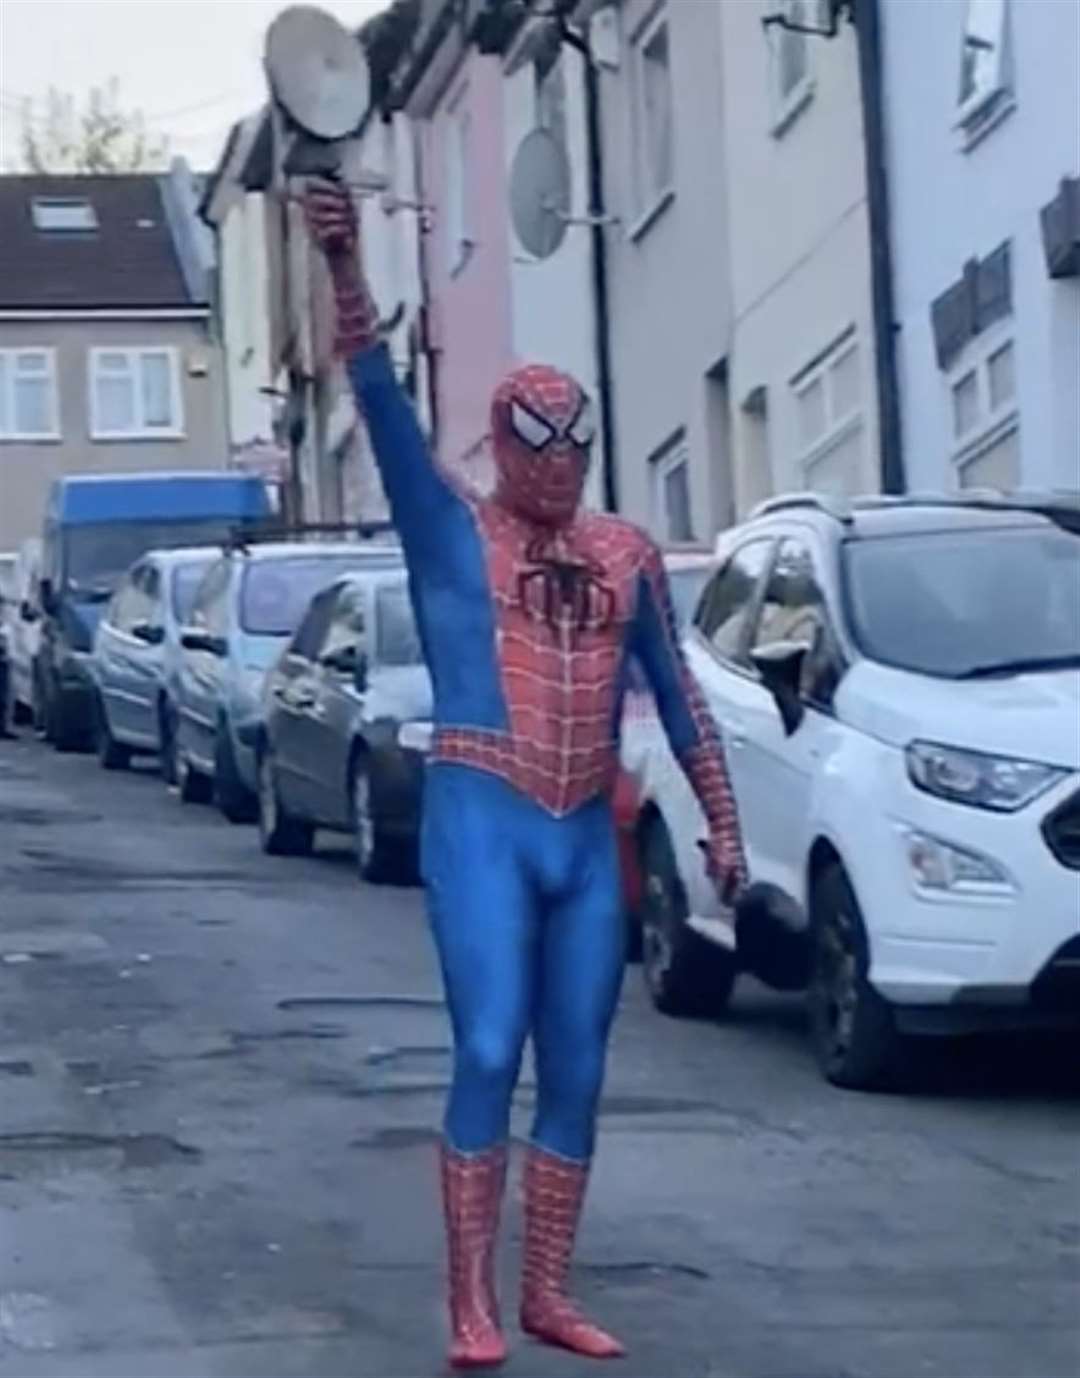 Spider-Man has been cheering people up in Chatham